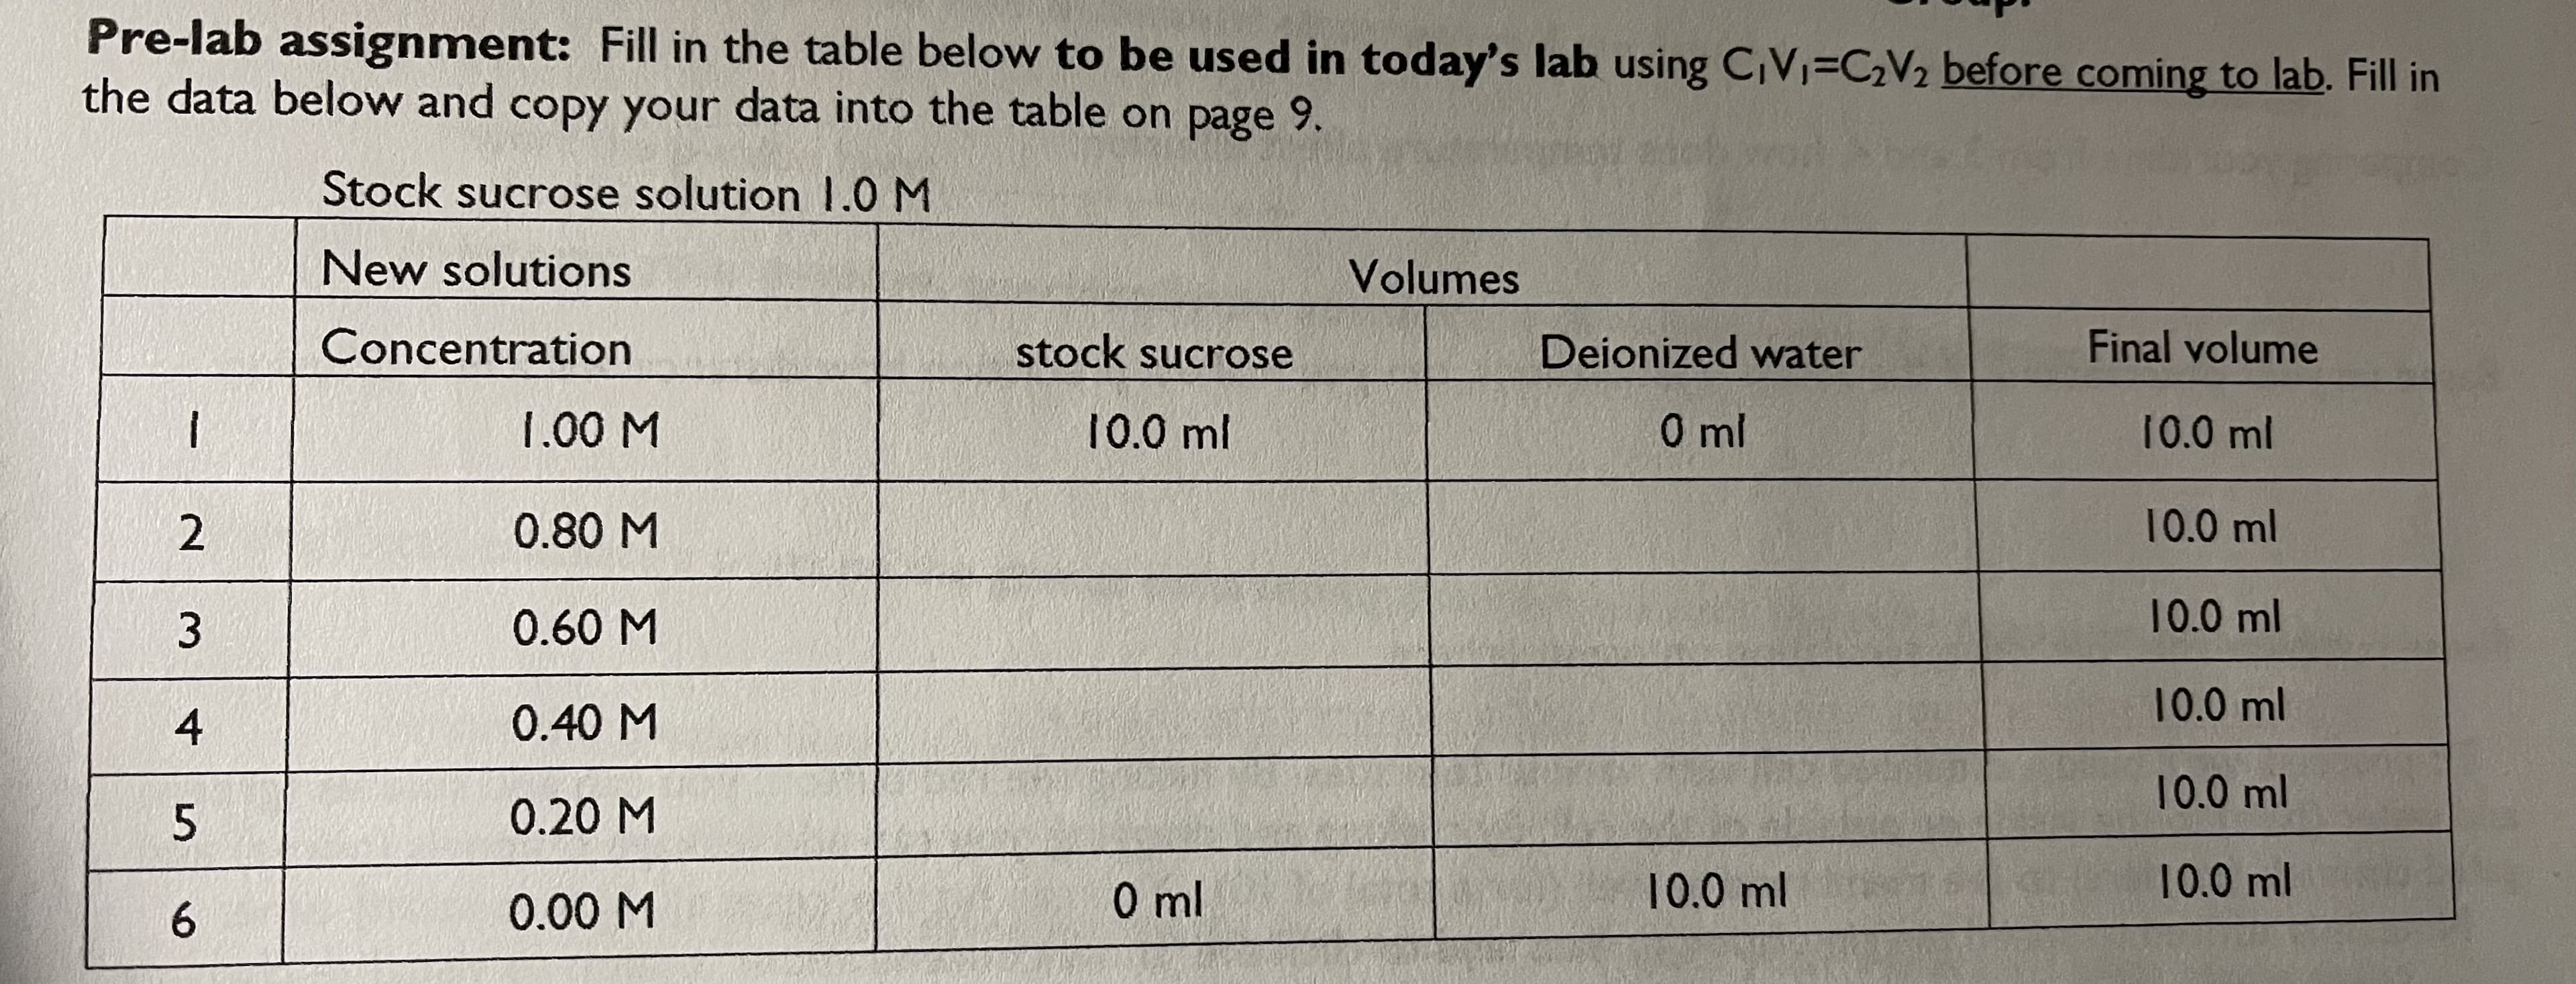 Pre-lab assignment: Fill in the table below to be used in today's lab using C,V=C2V2 before coming to lab. Fill in
the data below and copy your data into the table on page 9.
Stock sucrose solution .0 M
New solutions
Volumes
Concentration
stock sucrose
Deionized water
Final volume
1.00 M
10.0 ml
ml
10.0 ml
0.80 M
10.0 ml
10.0 ml
3
0.60 M
10.0 ml
4
0.40 M
10.0 ml
0.20 M
10.0 ml
10.0 ml
6.
0.00 M
ml
